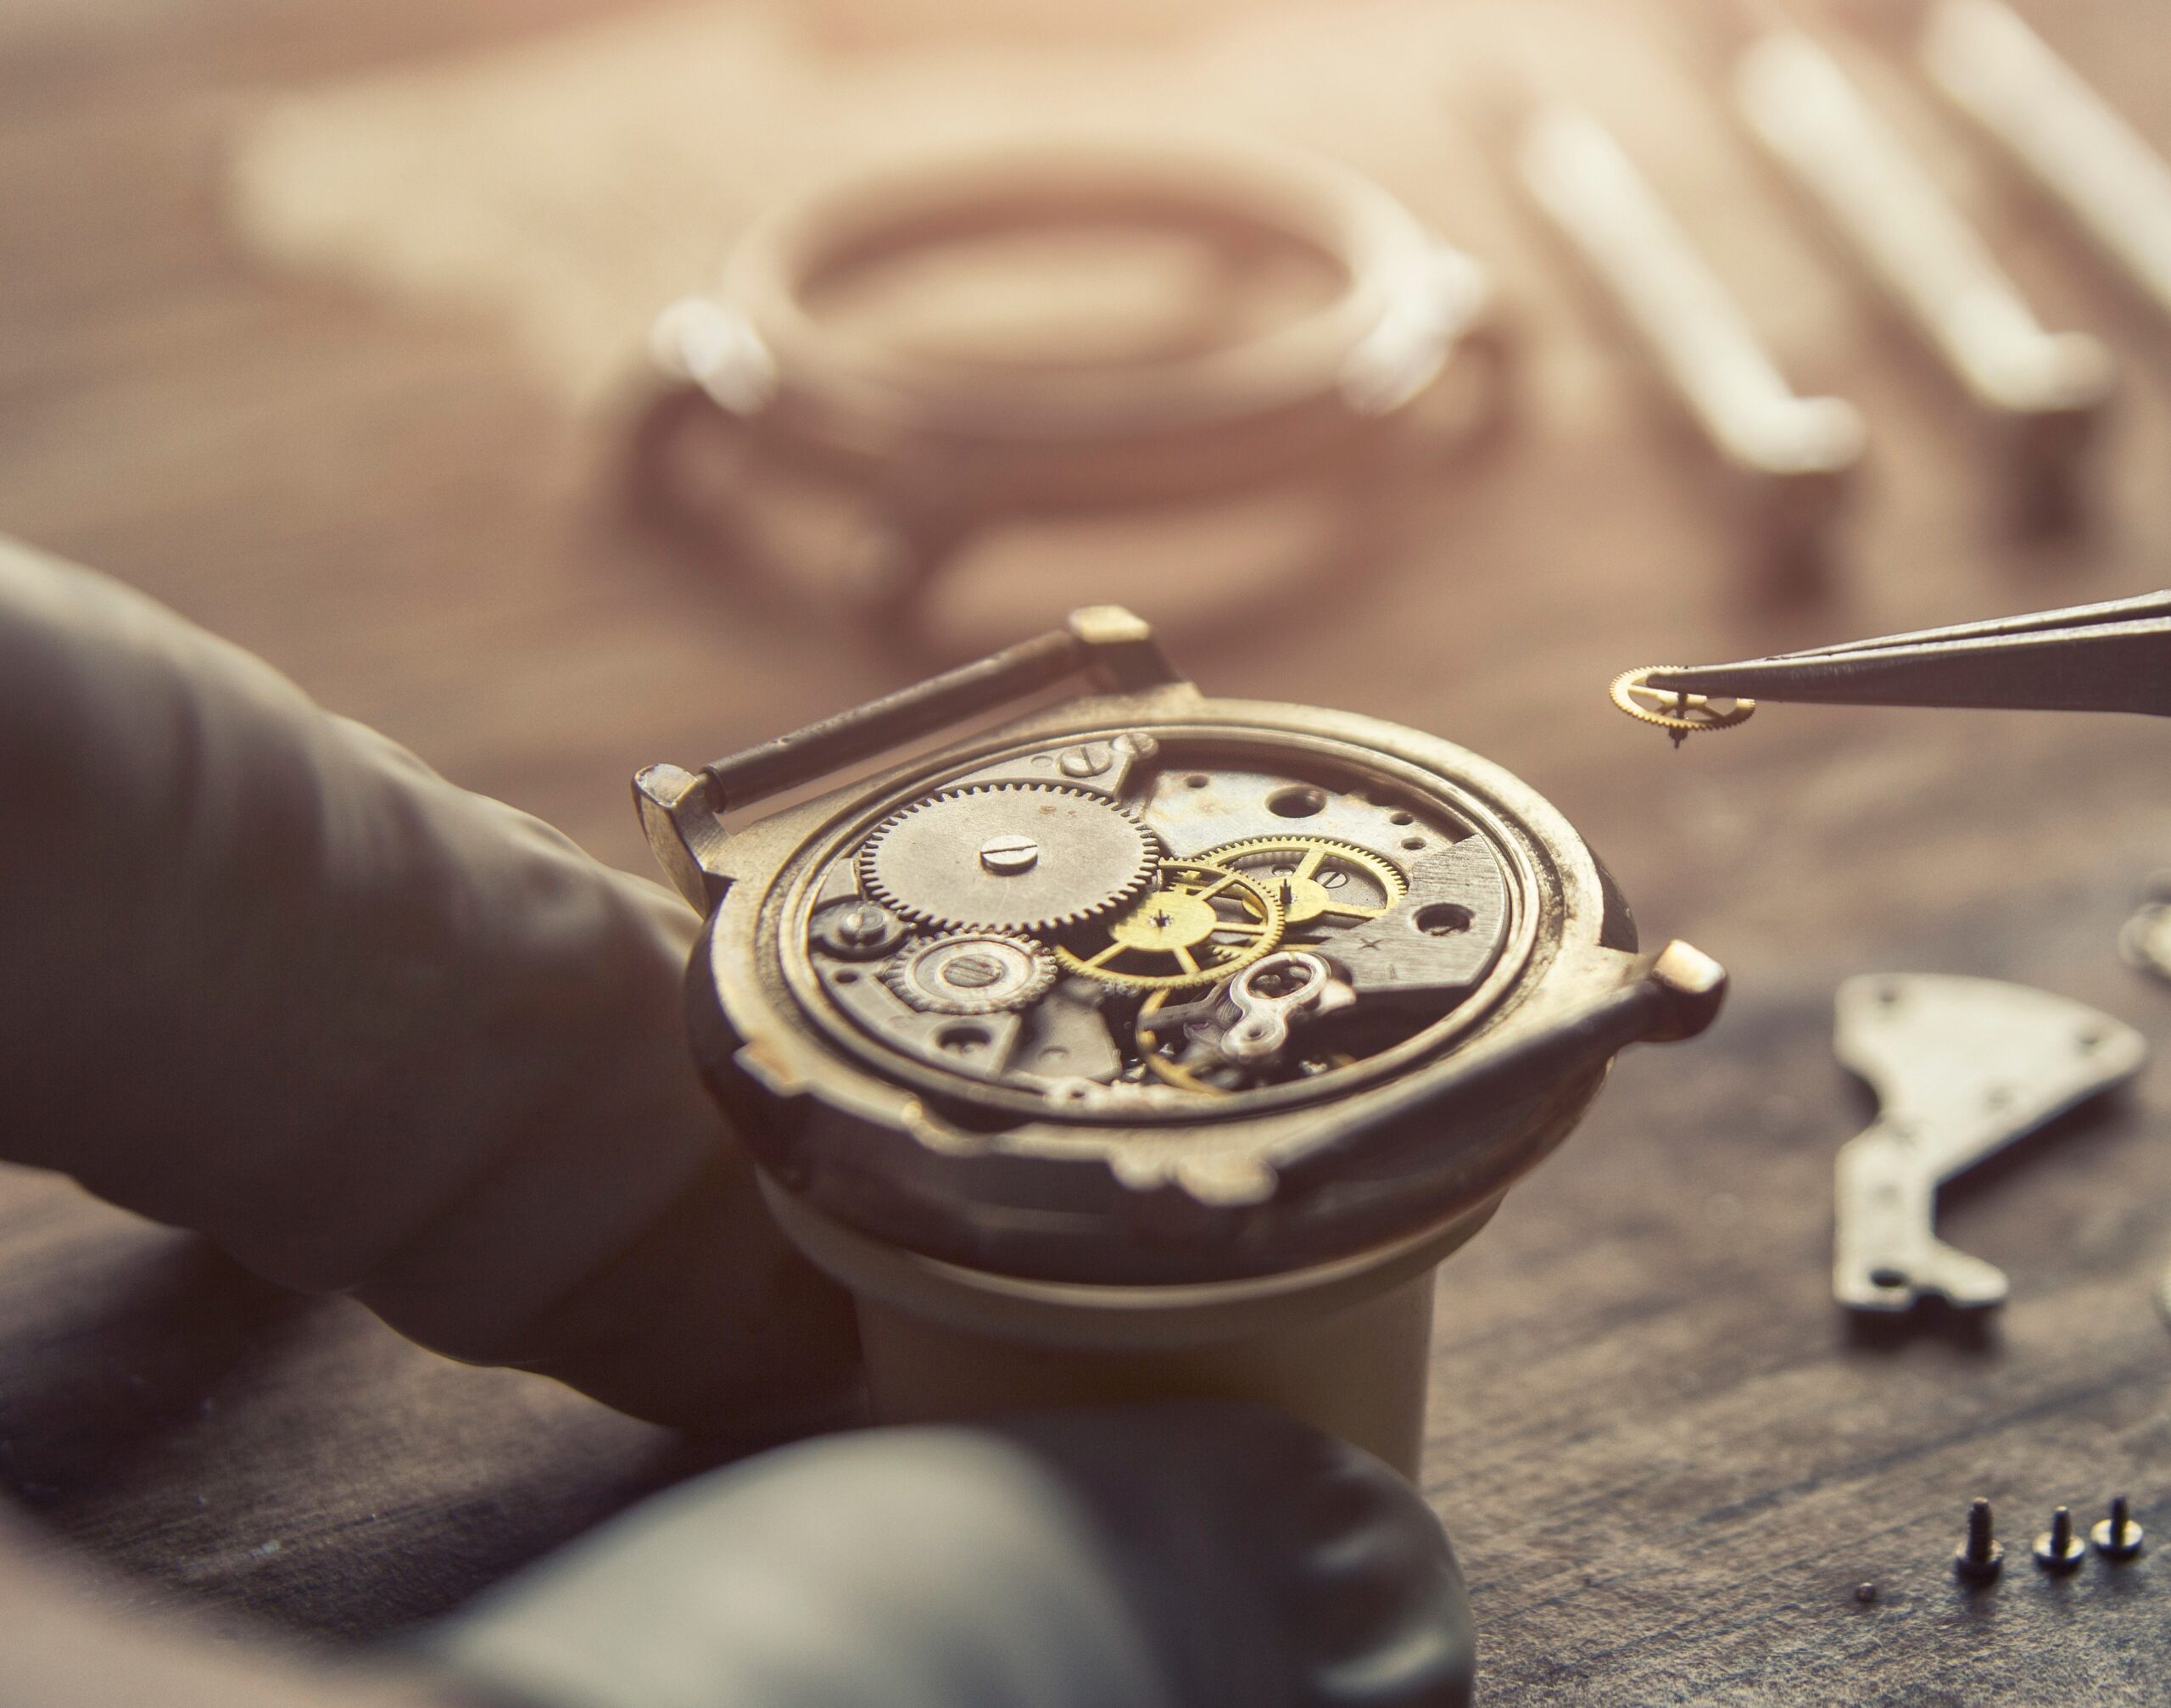 Watchmaker Working on a Watch Repair